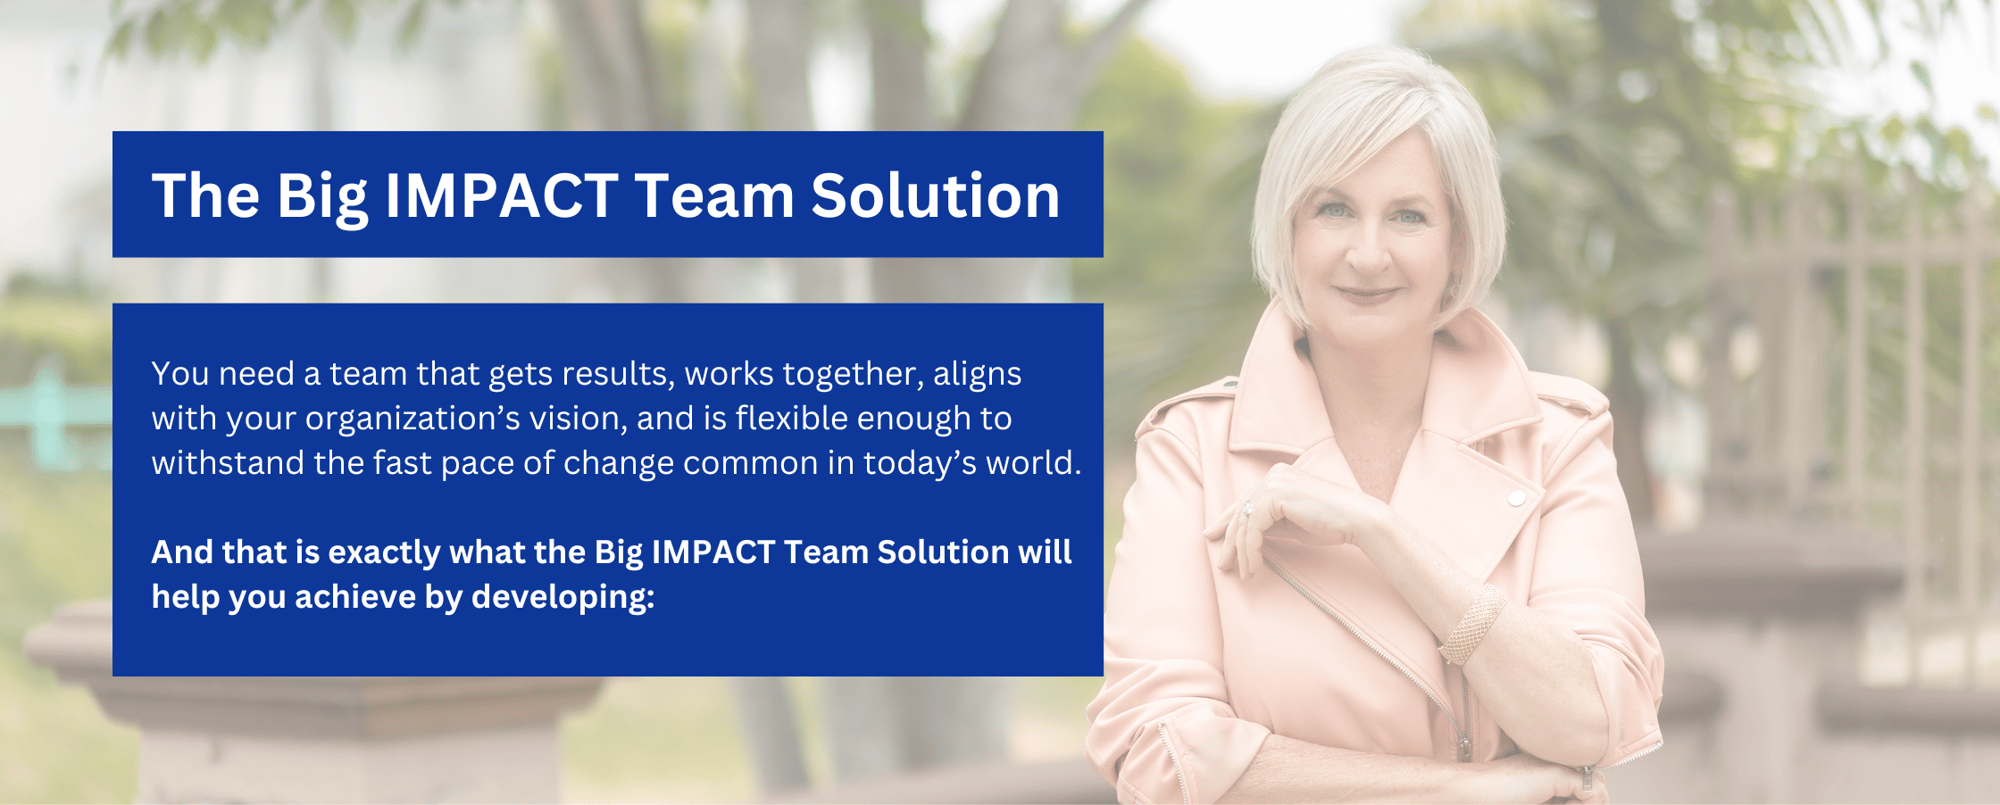 You need a team that gets results, works together, aligns with your organization’s vision, and is flexible enough to withstand the fast pace of change common in today’s world. (2)